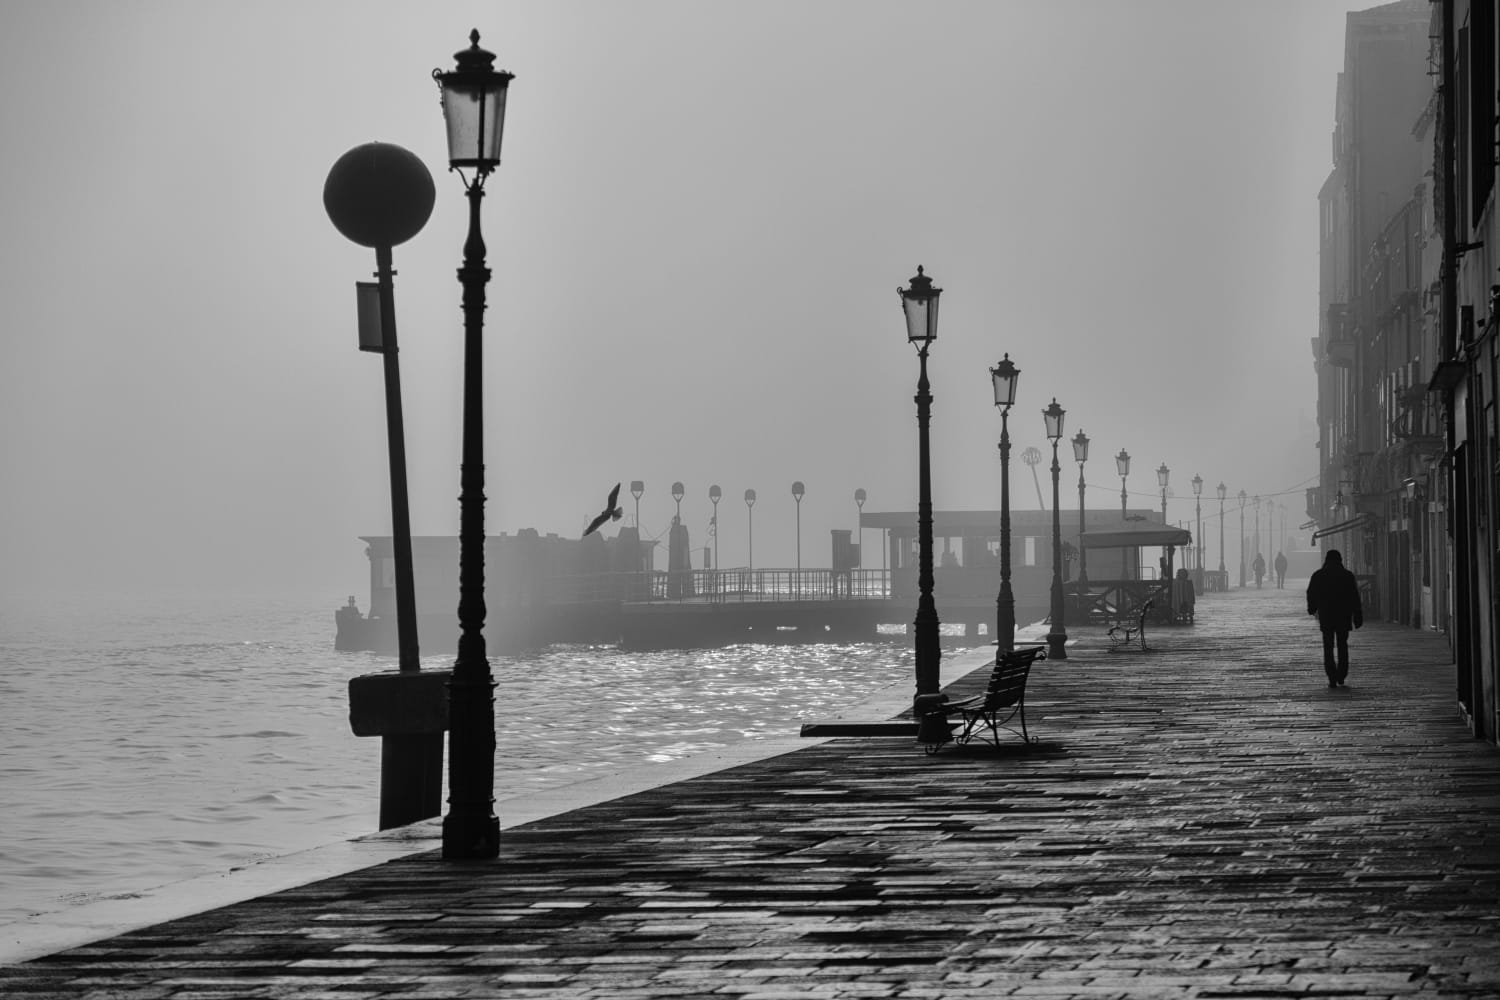 Misty walks in Venice, Italy (Photo credit to Philippe Mignot)